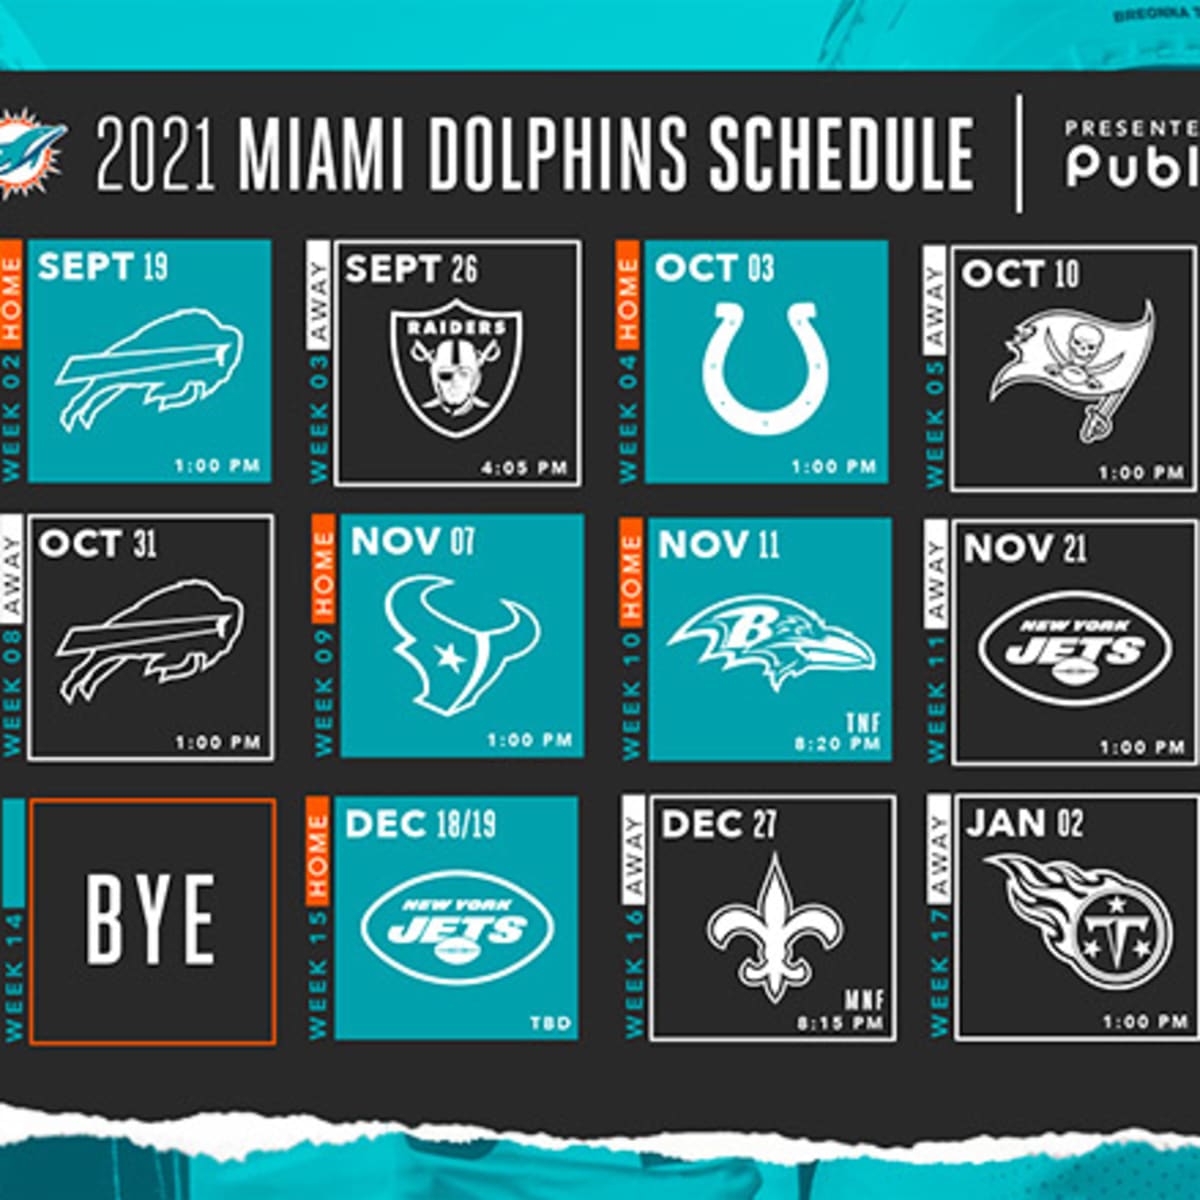 Miami Dolphins Football Schedule 2022 Miami Dolphins Schedule 2021 - Athlonsports.com | Expert Predictions,  Picks, And Previews